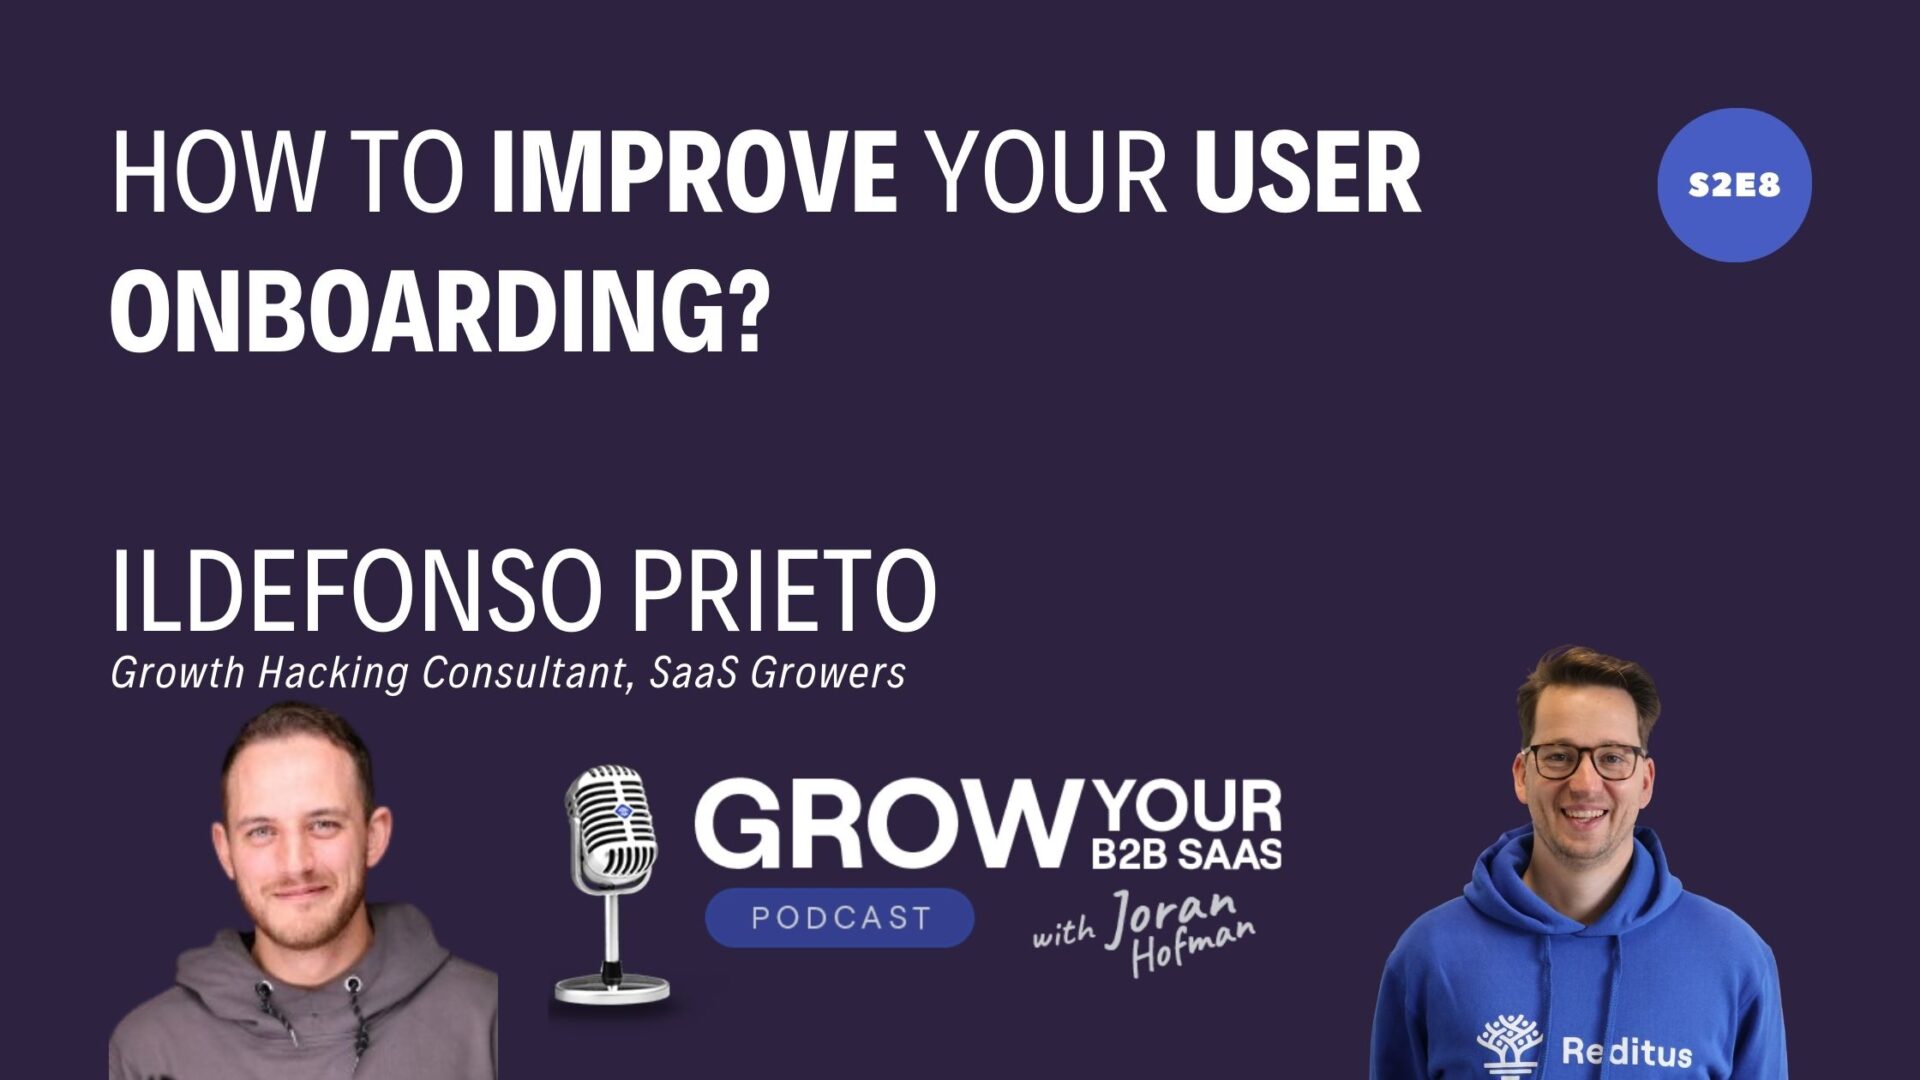 https://www.getreditus.com/podcast/s2e8-how-to-improve-your-user-onboarding-with-ildefonso-prieto/